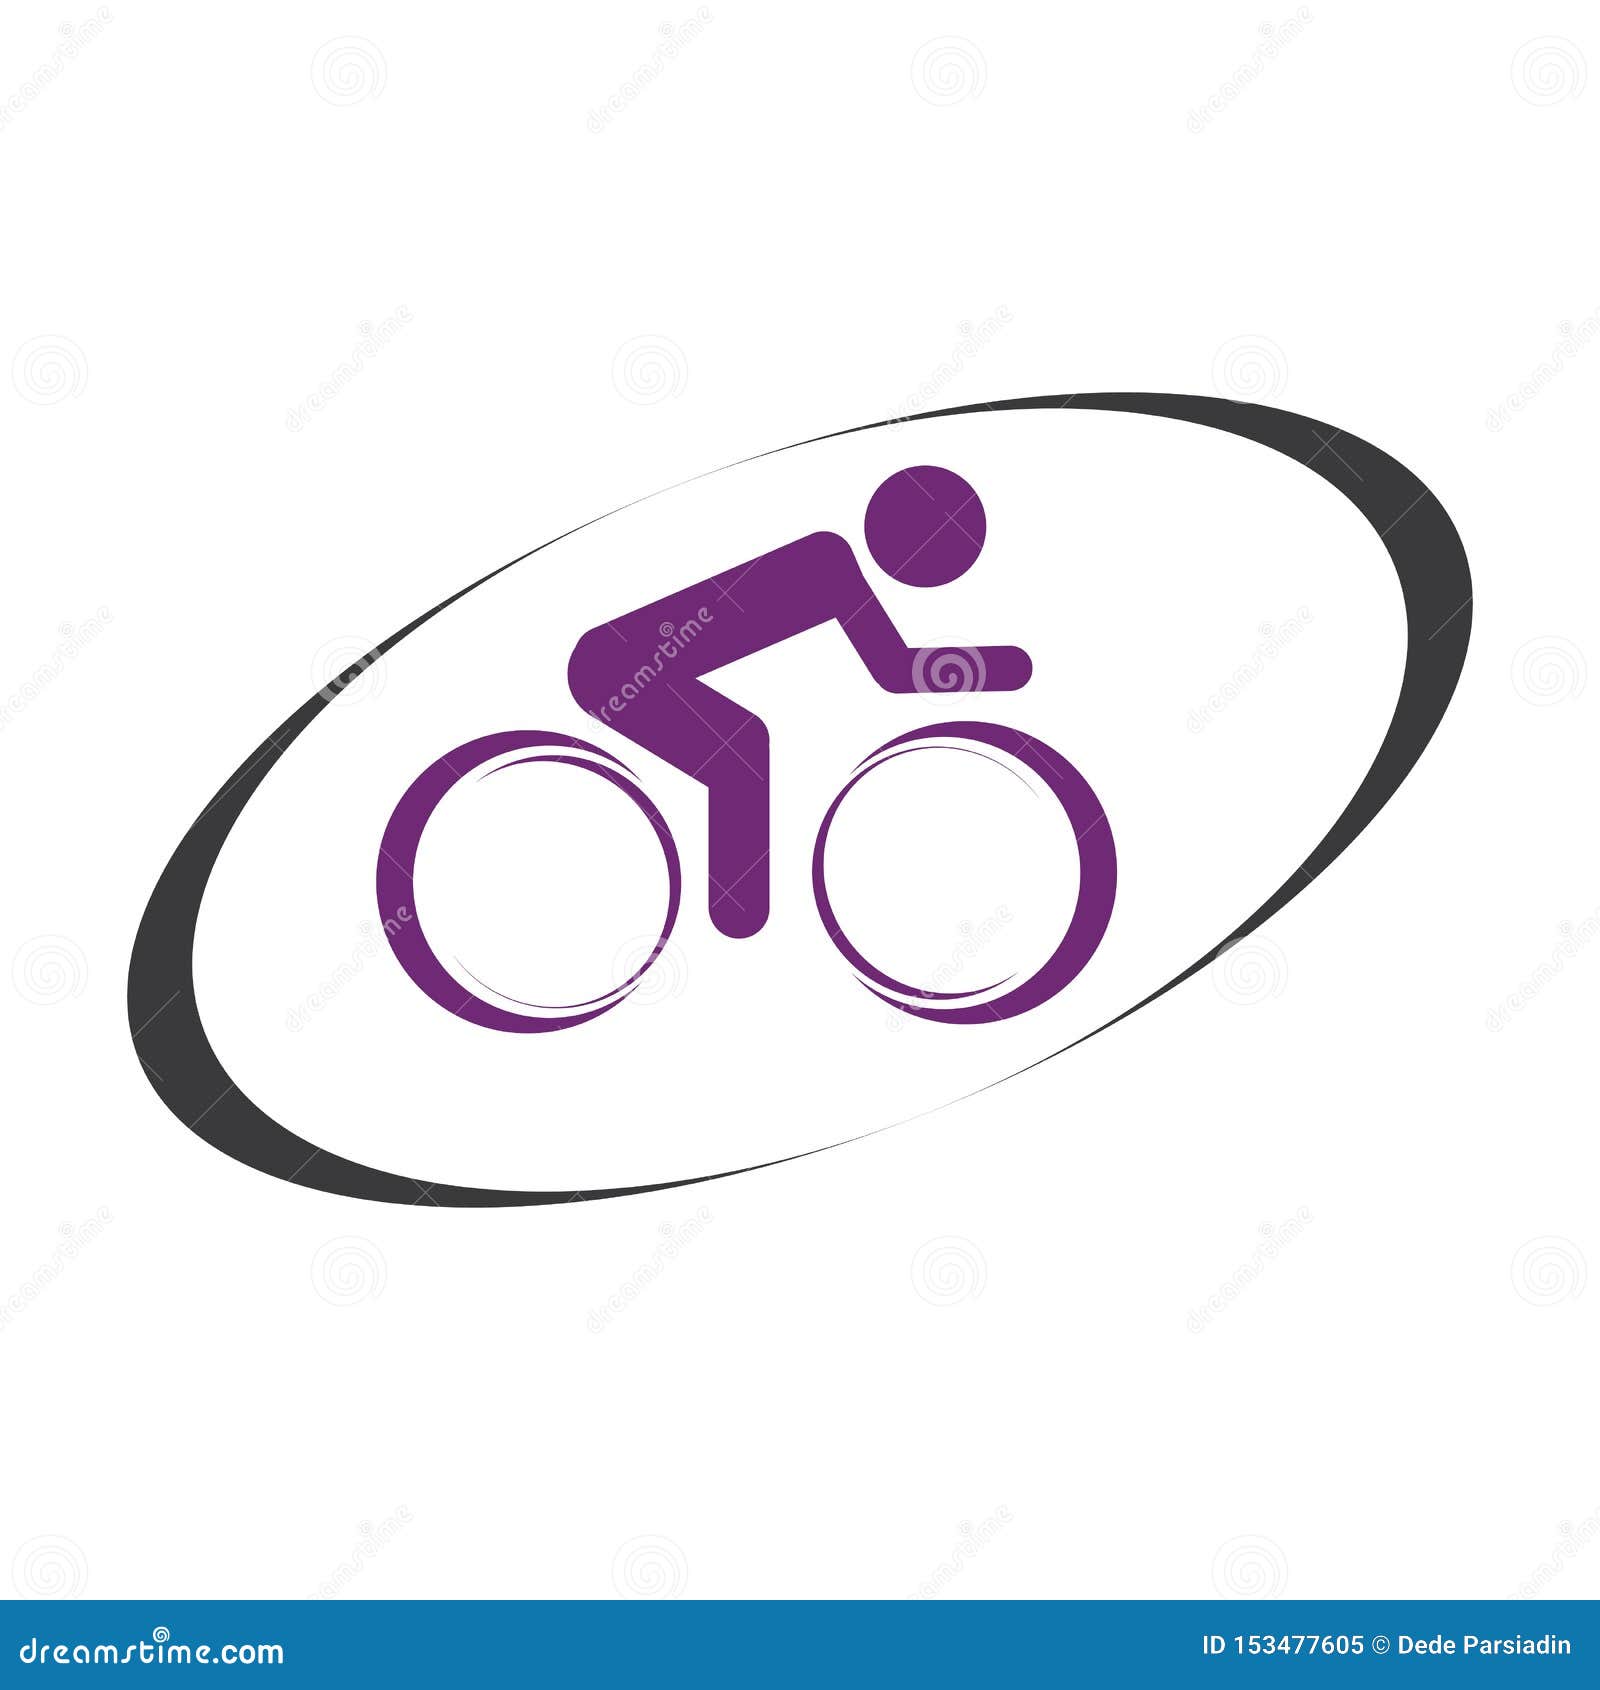 Bicycle stock vector. Illustration of bicycle, work - 153477605